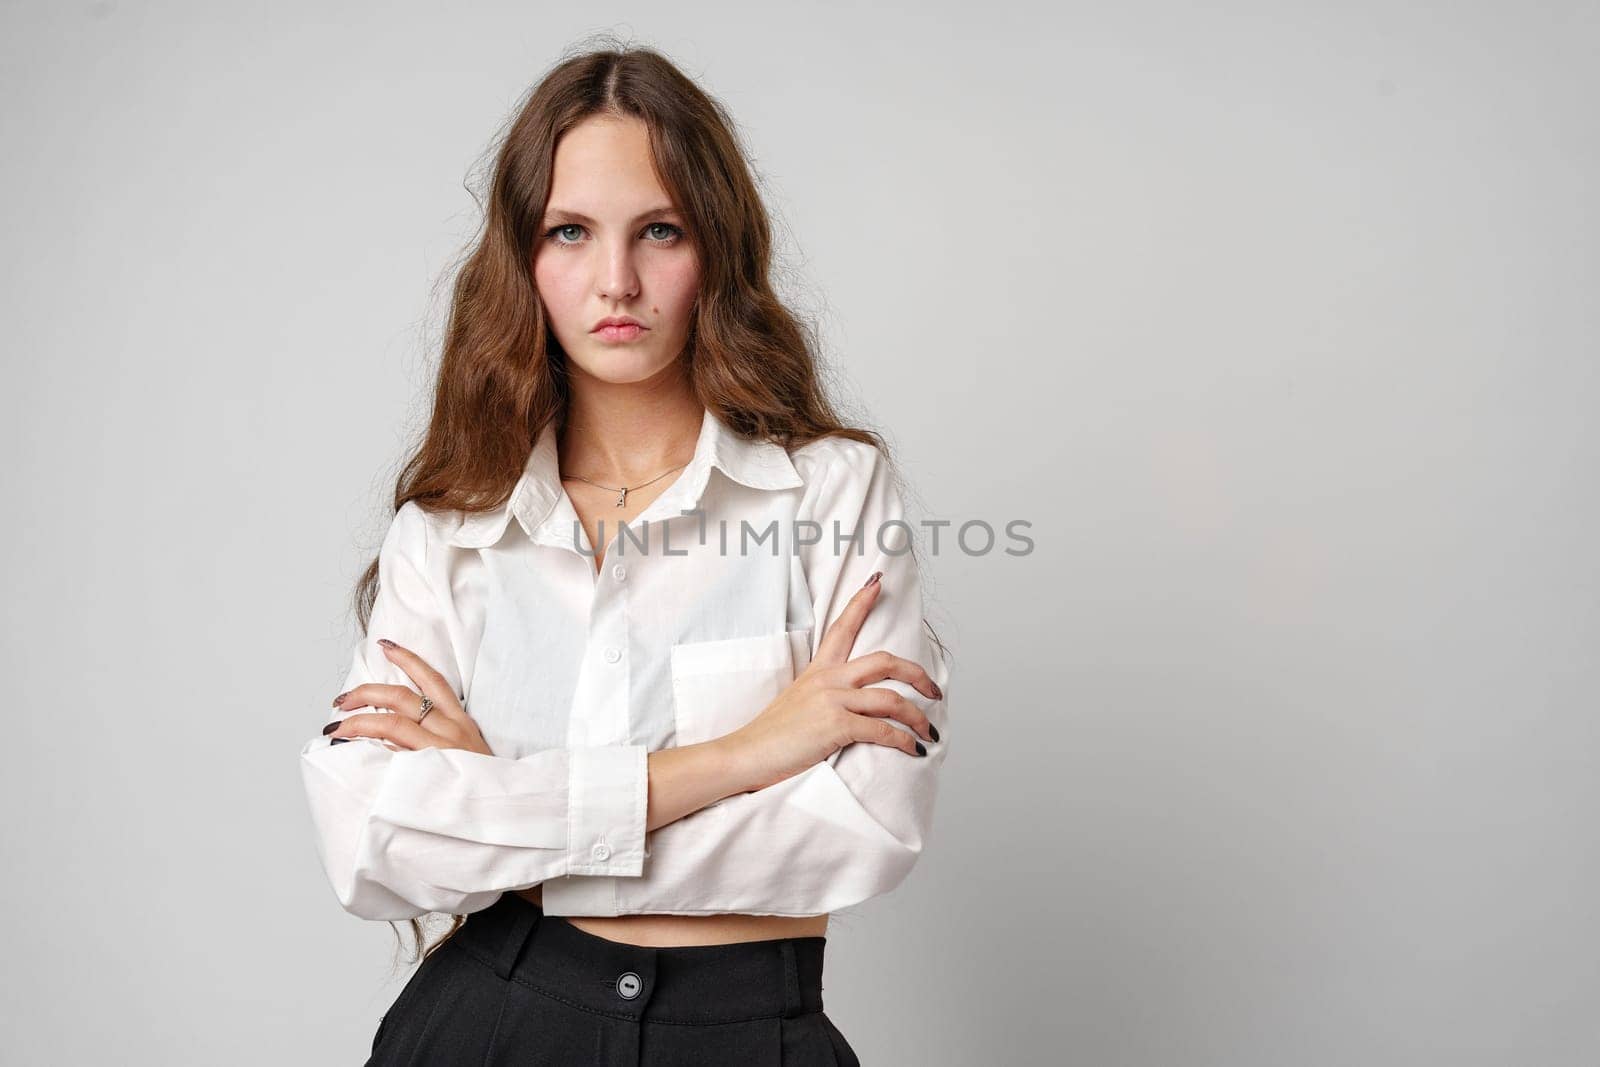 A woman is standing wearing a white shirt and black pants. She has a confident stance and is looking directly at the camera. by Fabrikasimf